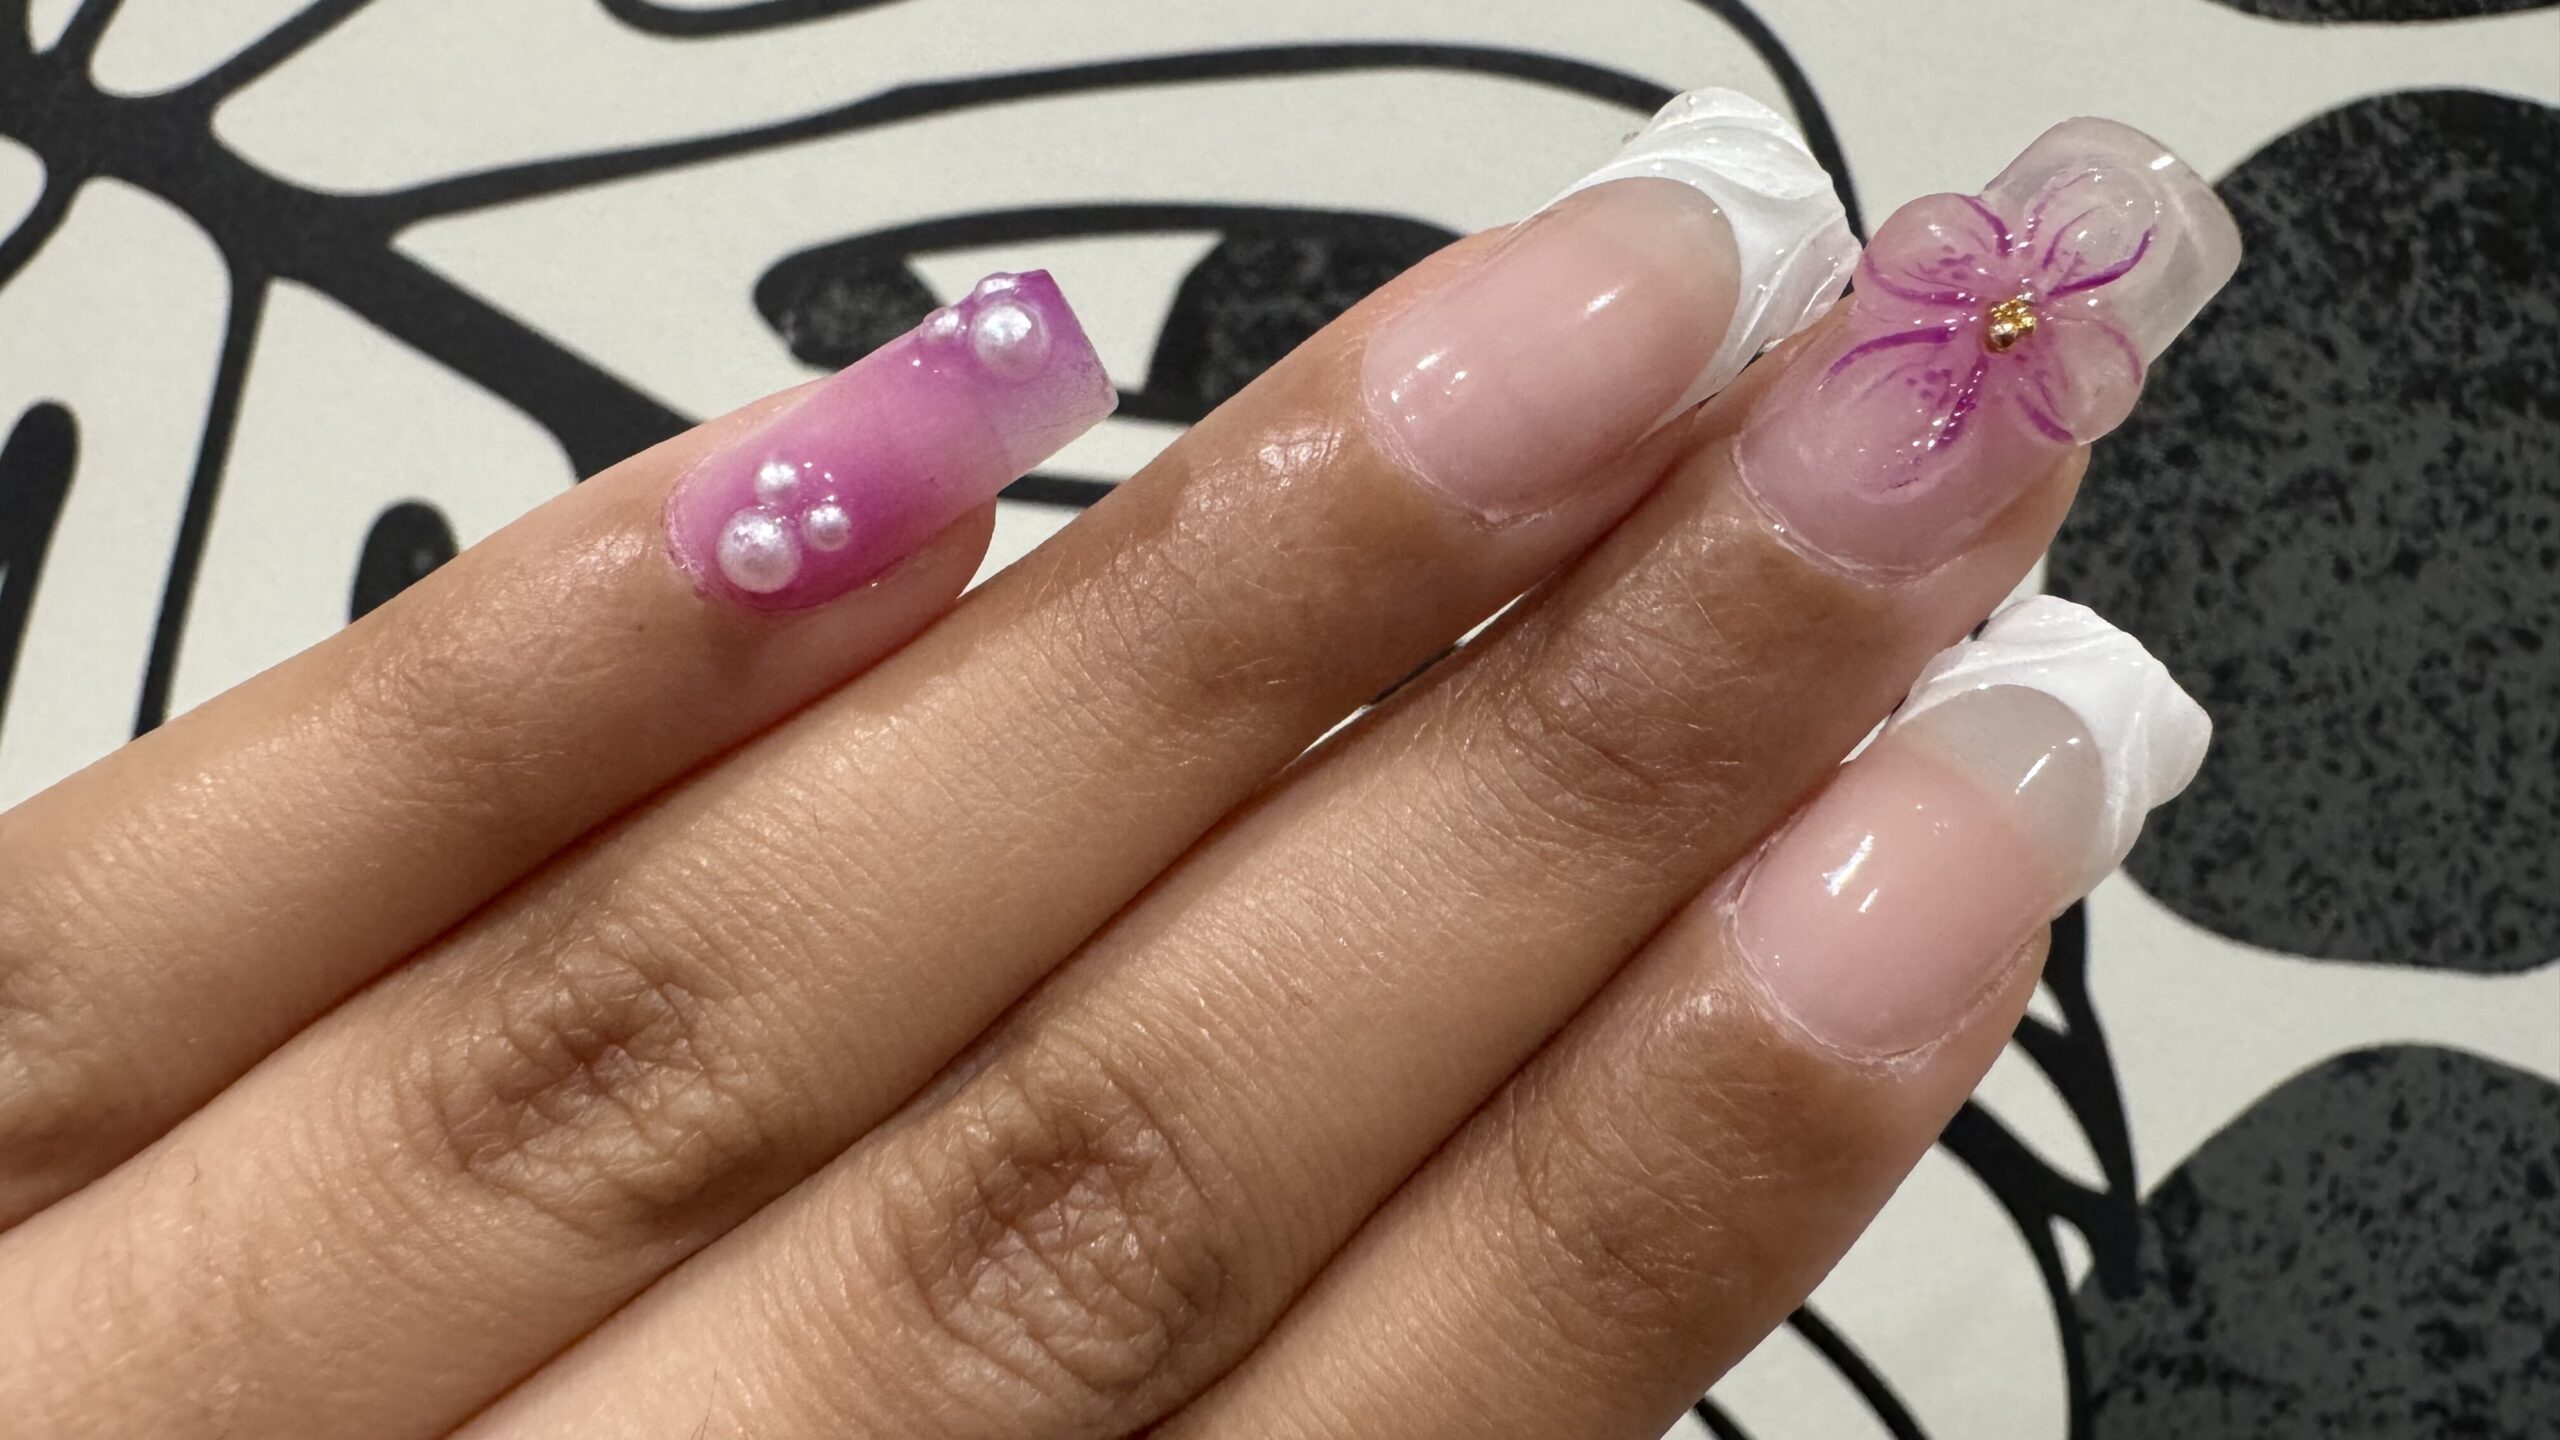 Trend Alert: Island Nails Are Filling The Feed